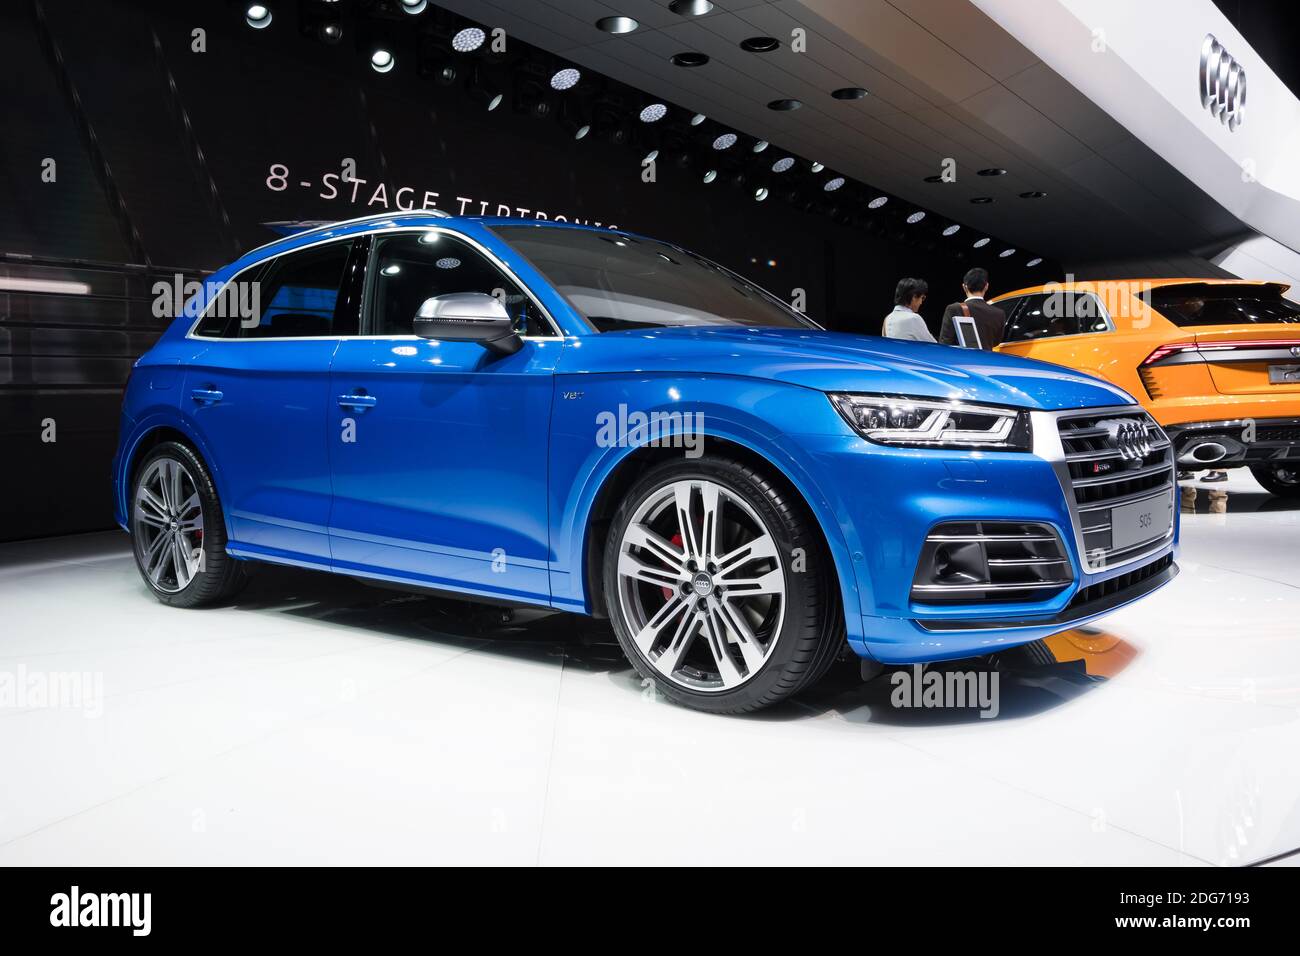 Audi SQ5 is on display during the 87th Geneva International Motor Show at Palexpo Exhibition Centre in Geneva, Switzerland on March 08, 2017. The show opens to the public on March 9 to 19. Photo by Loona/ABACAPRESS.COM Stock Photo